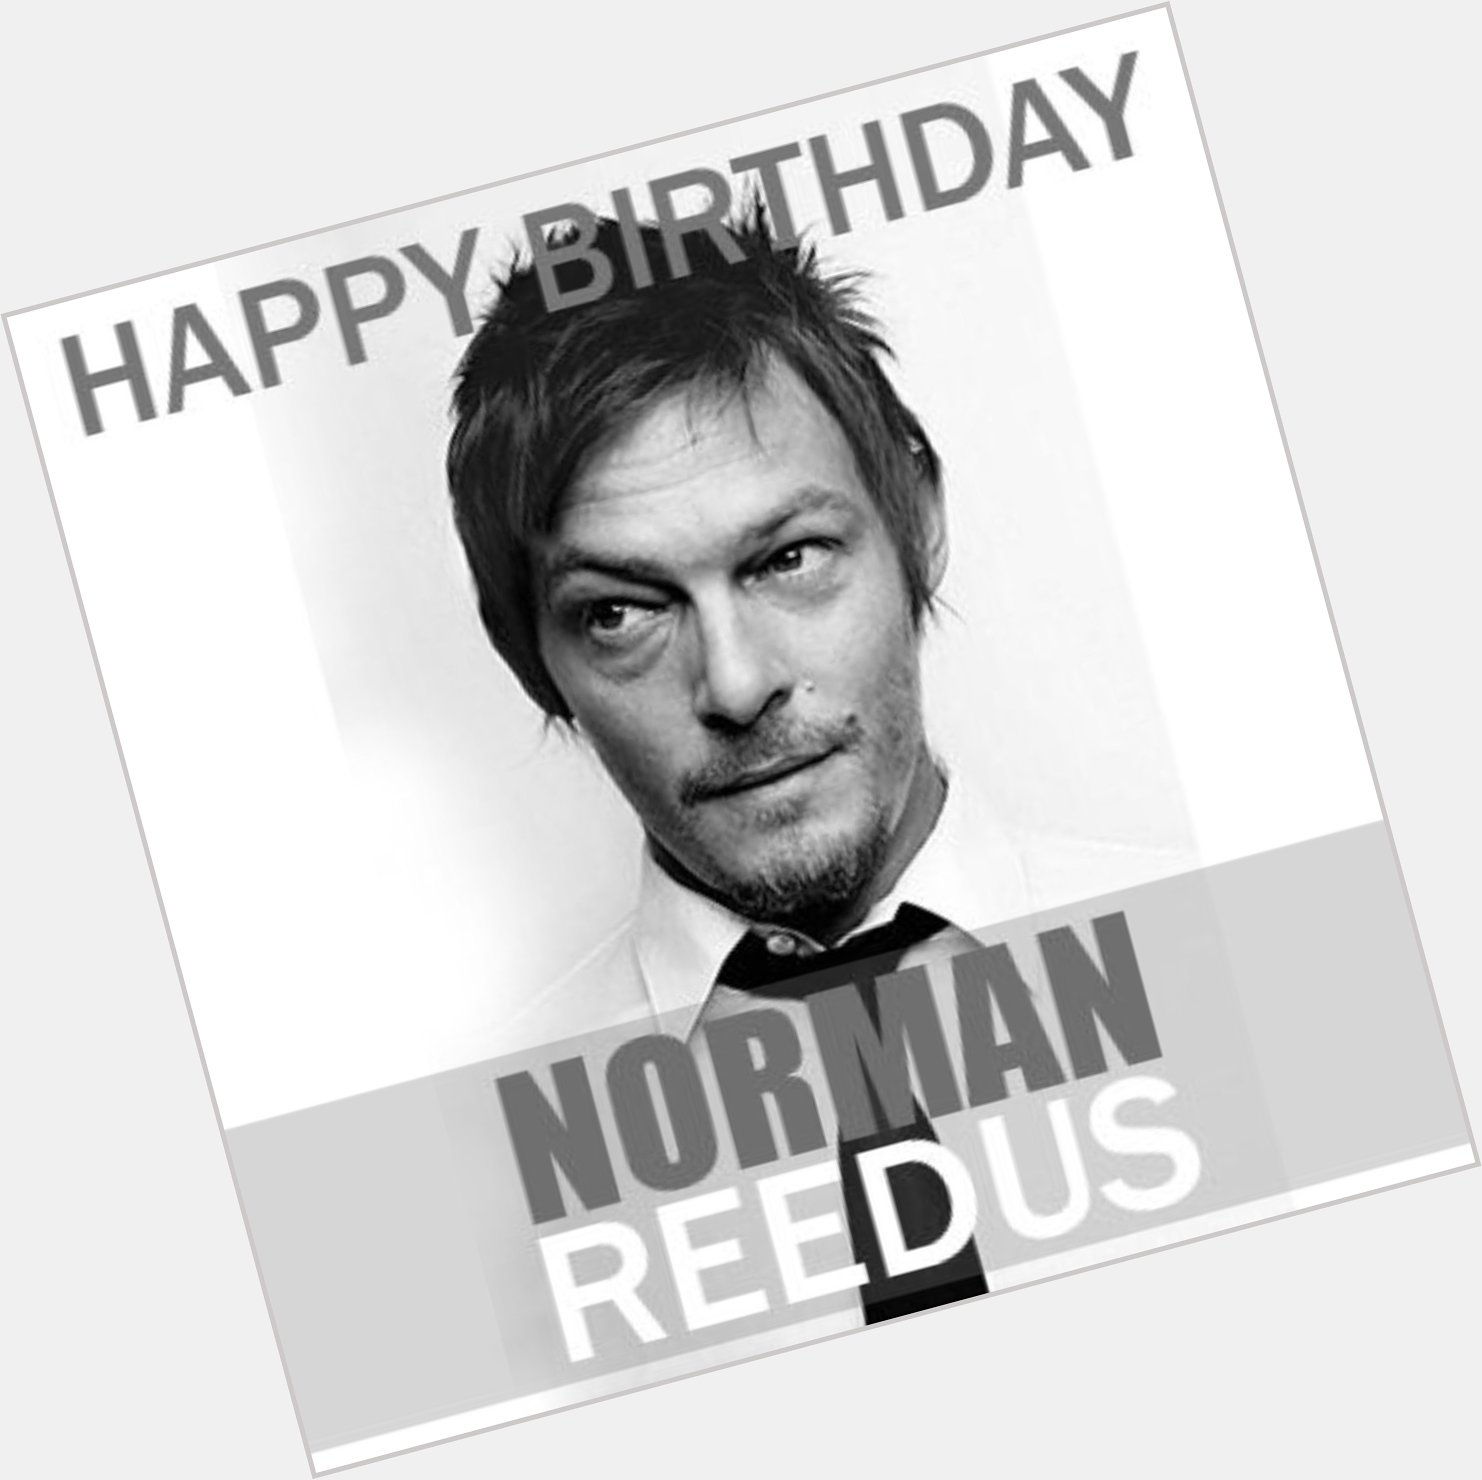 HUGE HAPPY BIRTHDAY TO MR NORMAN REEDUS..... have a good one brotha     